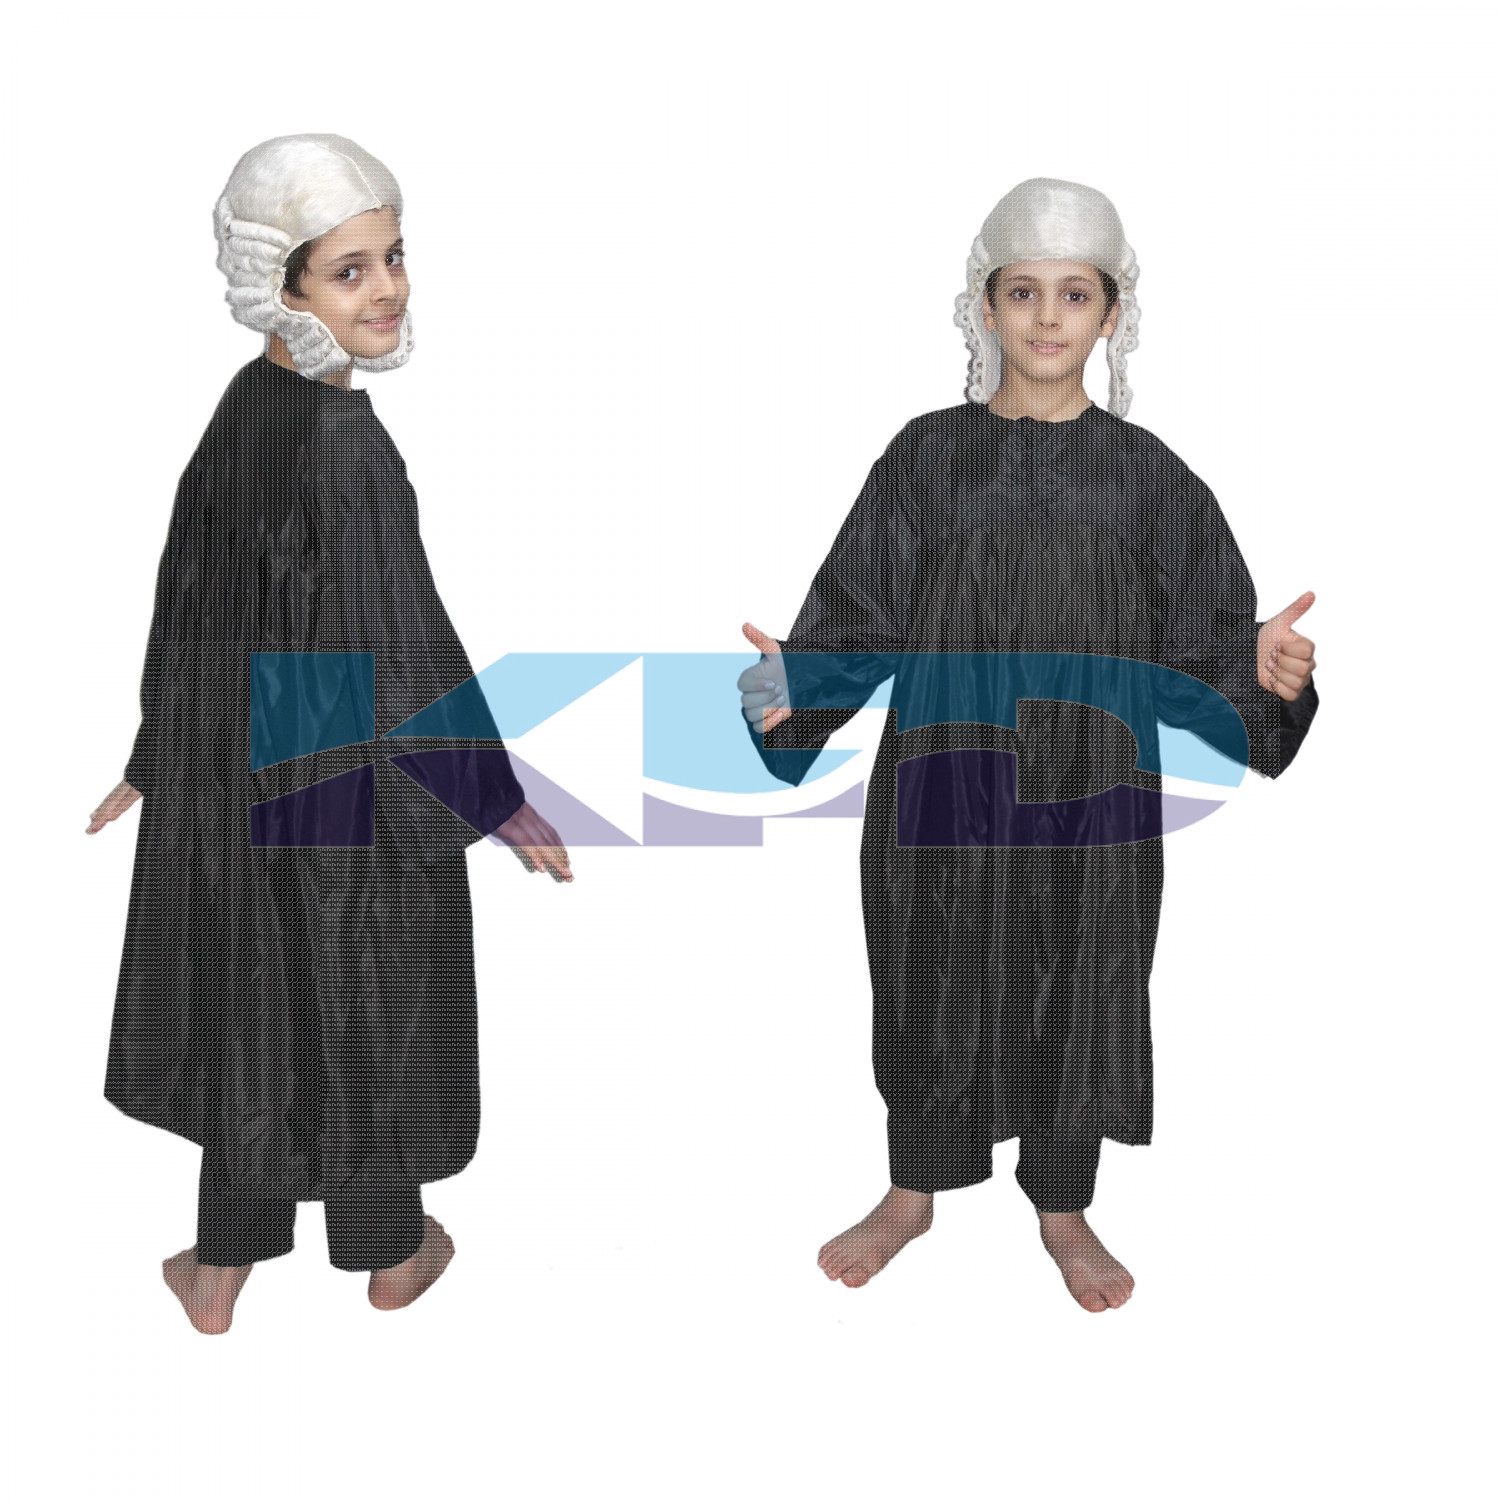 Judge Fancy Dress For Kids,Our Helper Costume For Annual Function/Theme Party/Competition/Stage Shows Dress